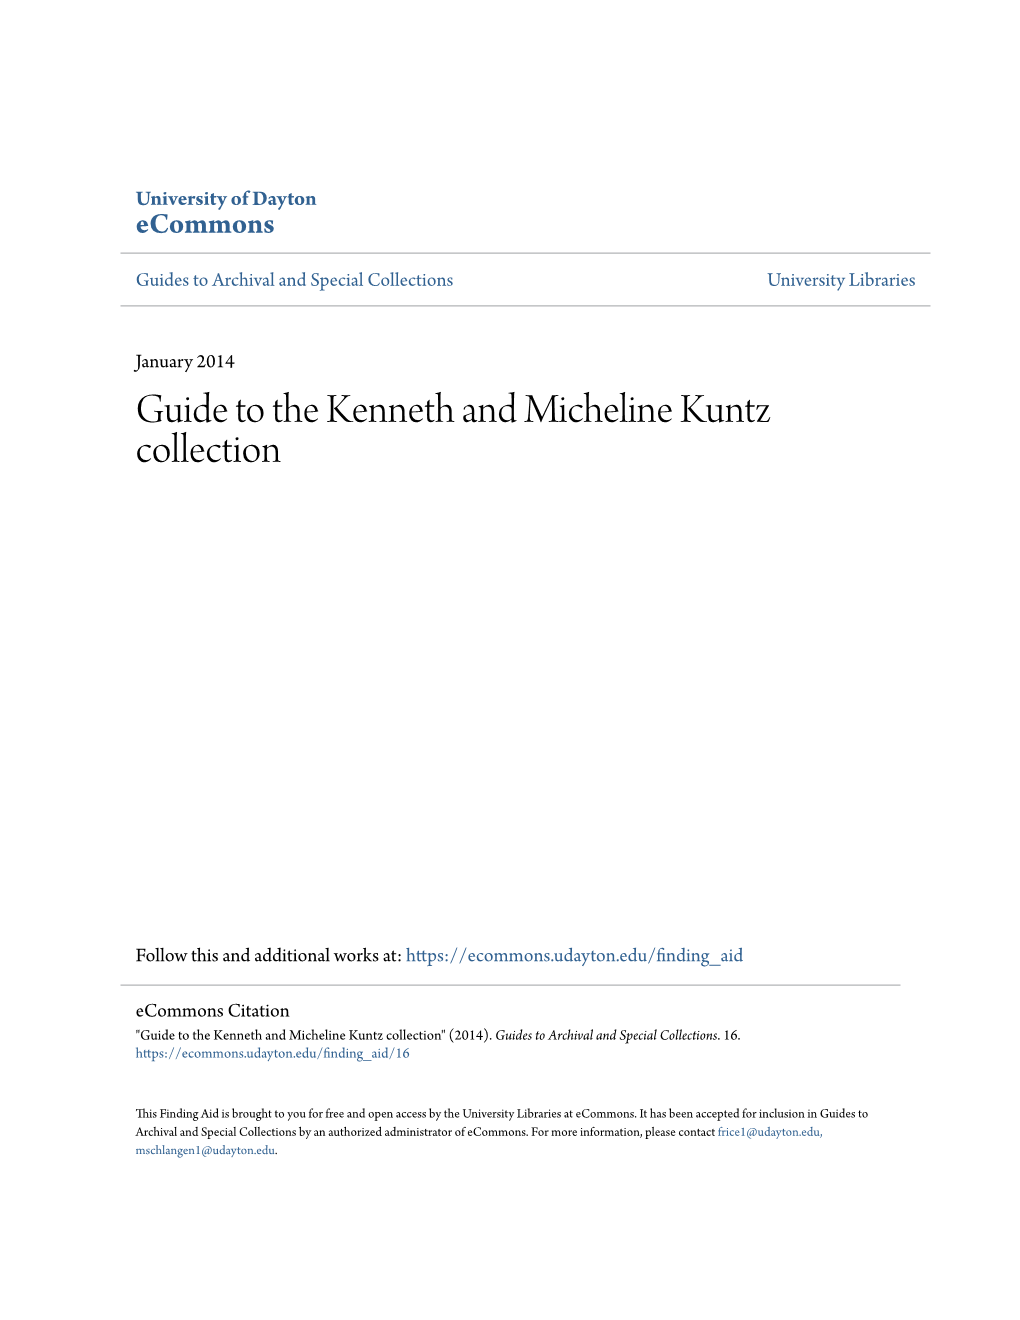 Guide to the Kenneth and Micheline Kuntz Collection